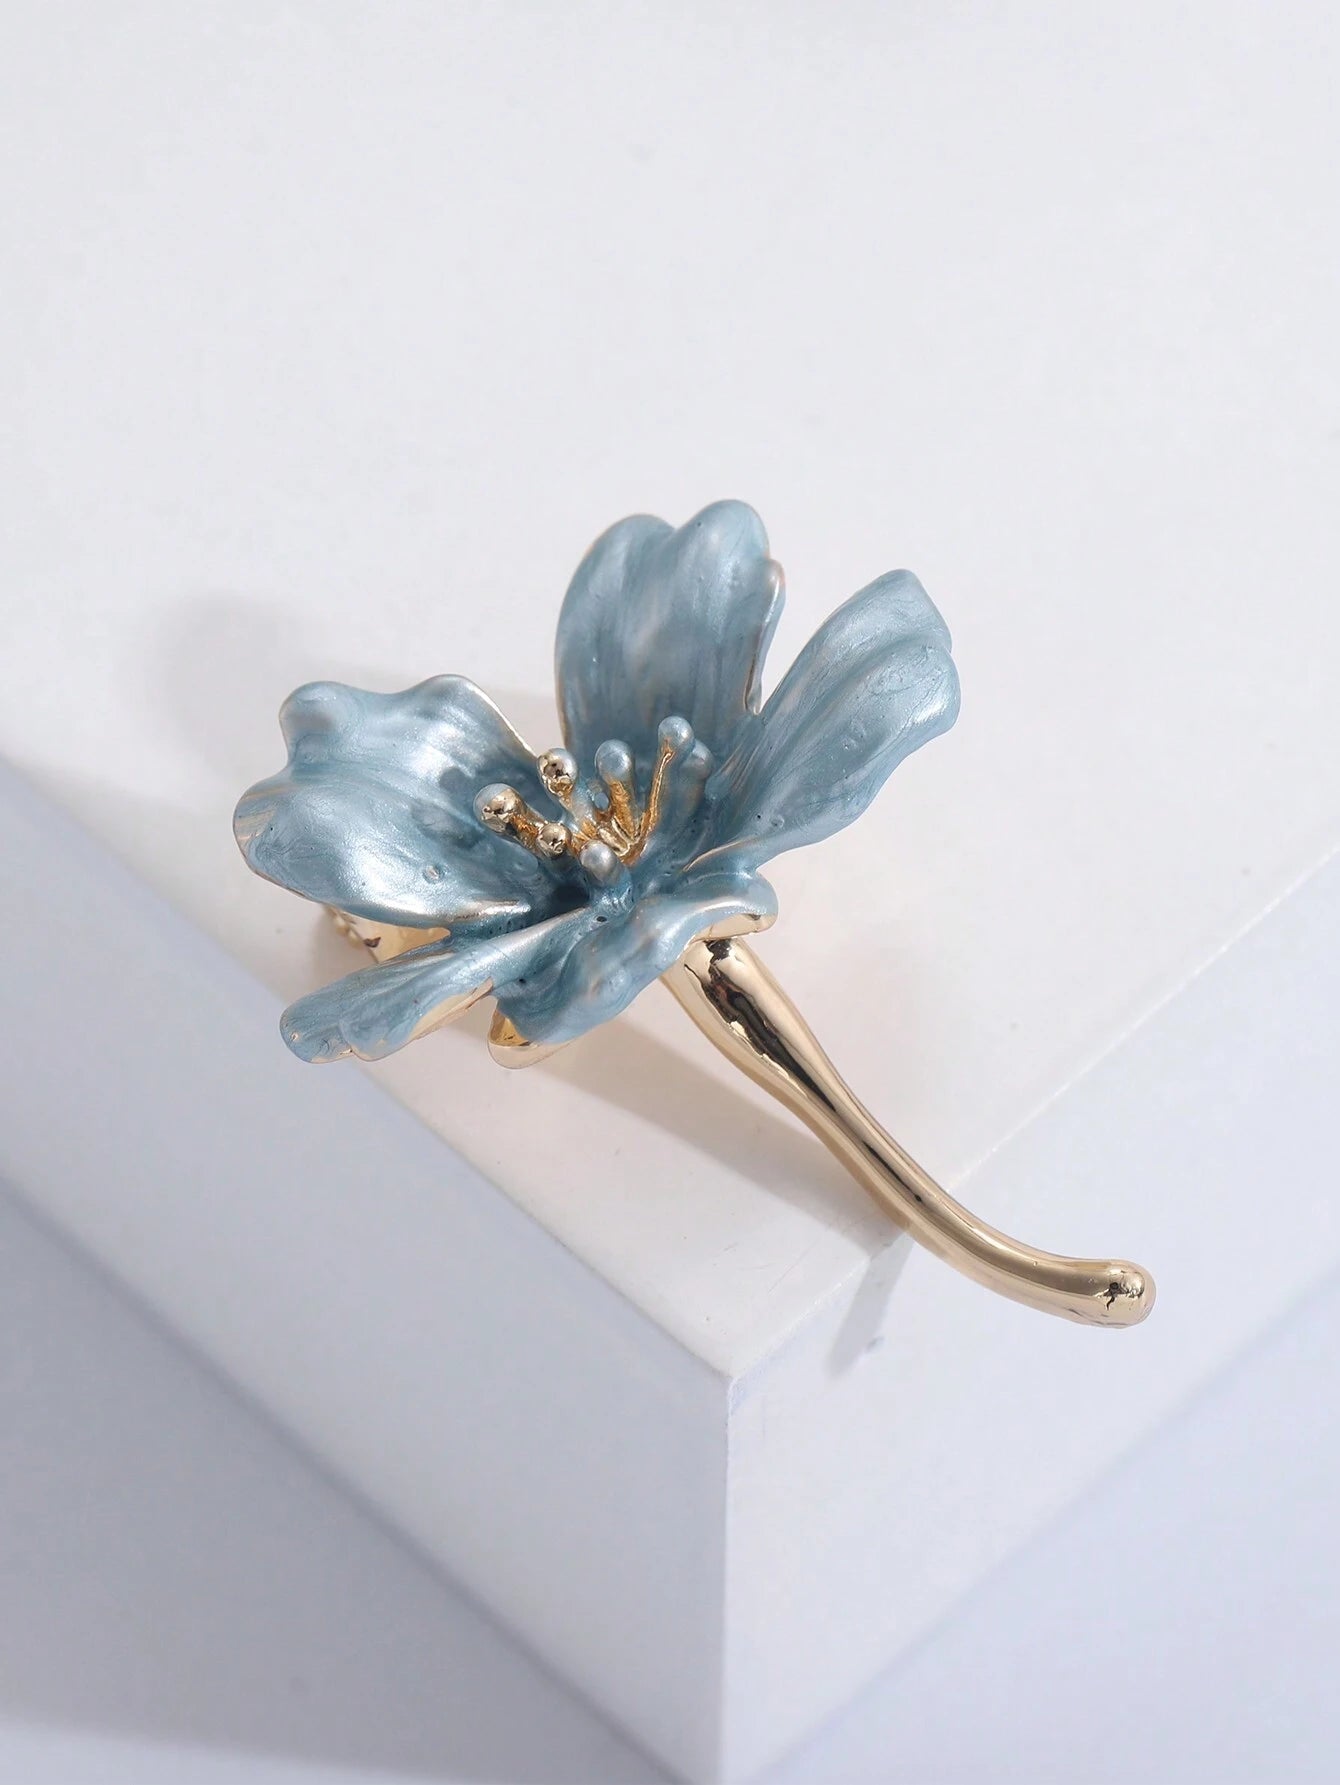 Alloy Floral Shaped Brooch